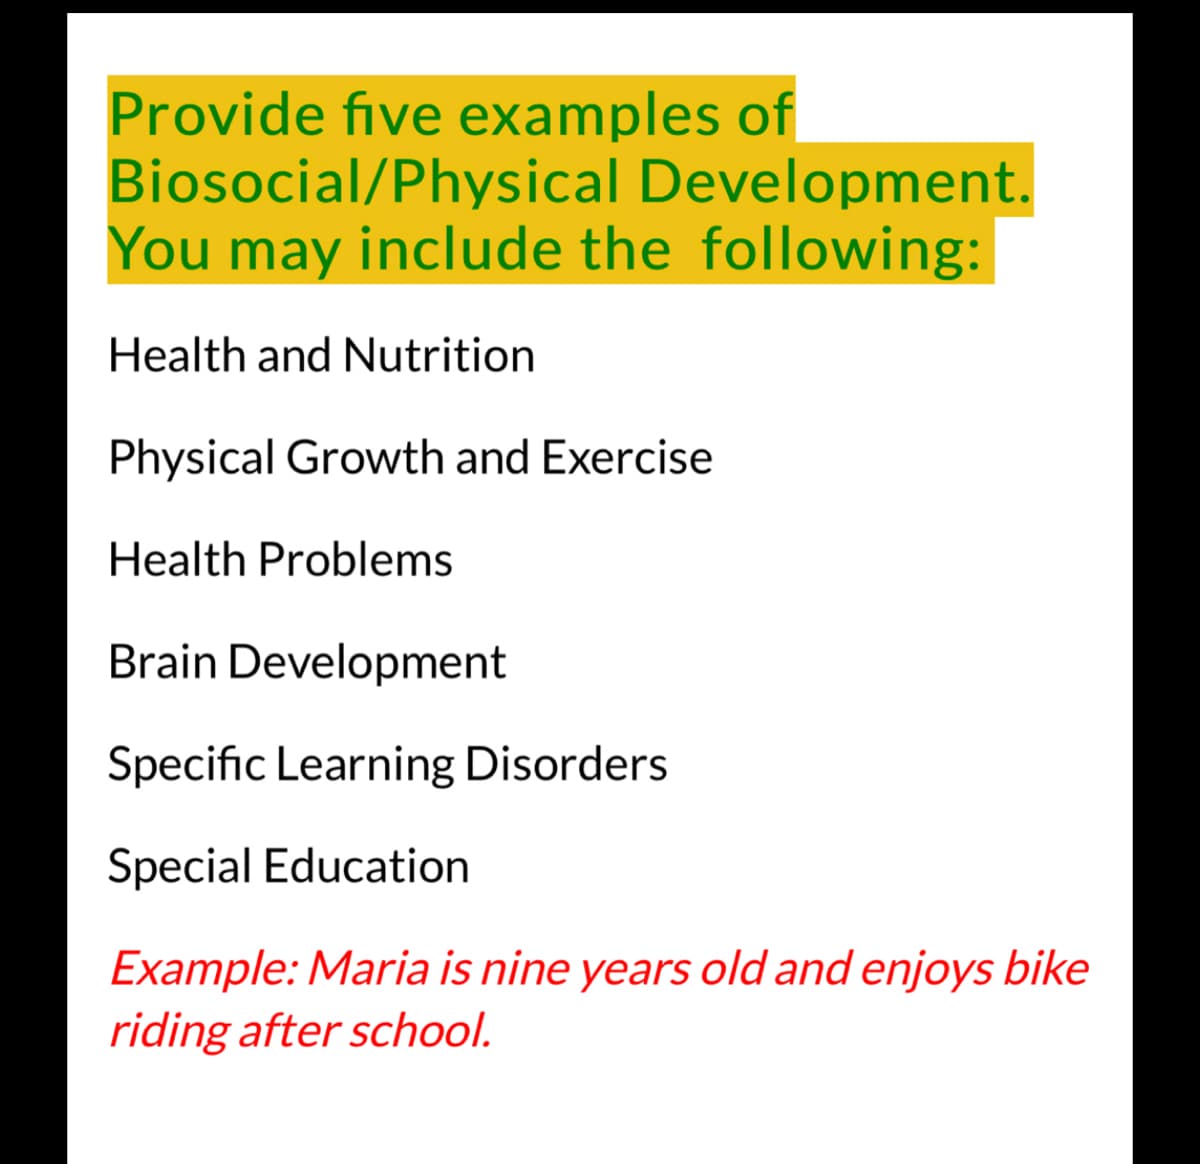 Provide five examples of
Biosocial/Physical Development.
You may include the following:
Health and Nutrition
Physical Growth and Exercise
Health Problems
Brain Development
Specific Learning Disorders
Special Education
Example: Maria is nine years old and enjoys bike
riding after school.